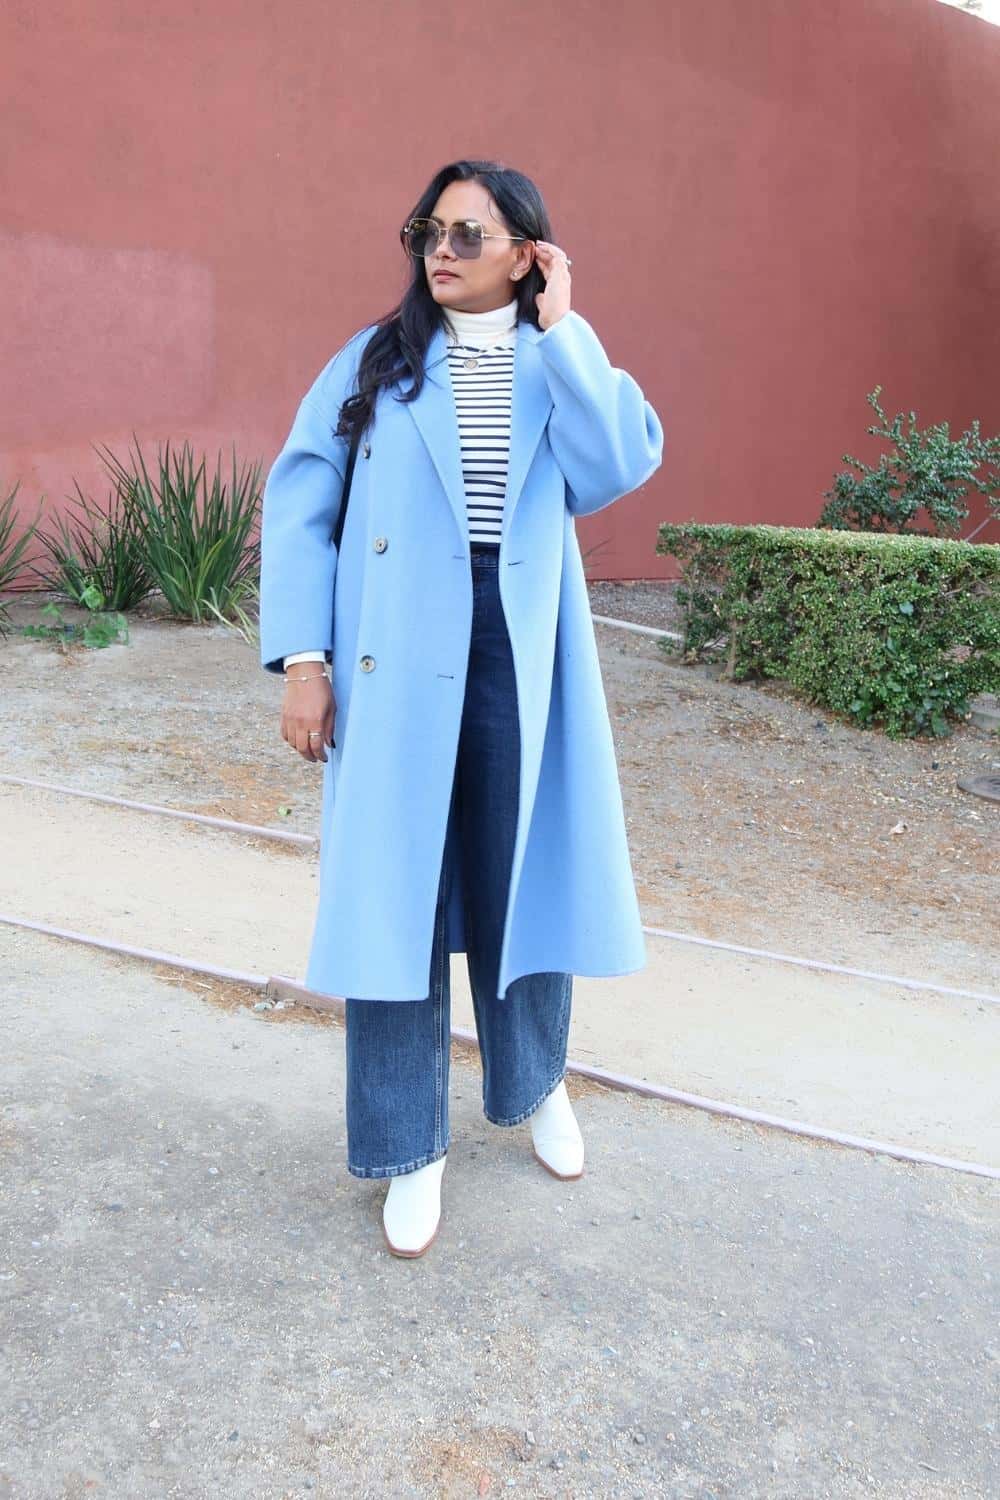 Wide Leg Jeans Outfit with Blue Coat and White Ankle Boots